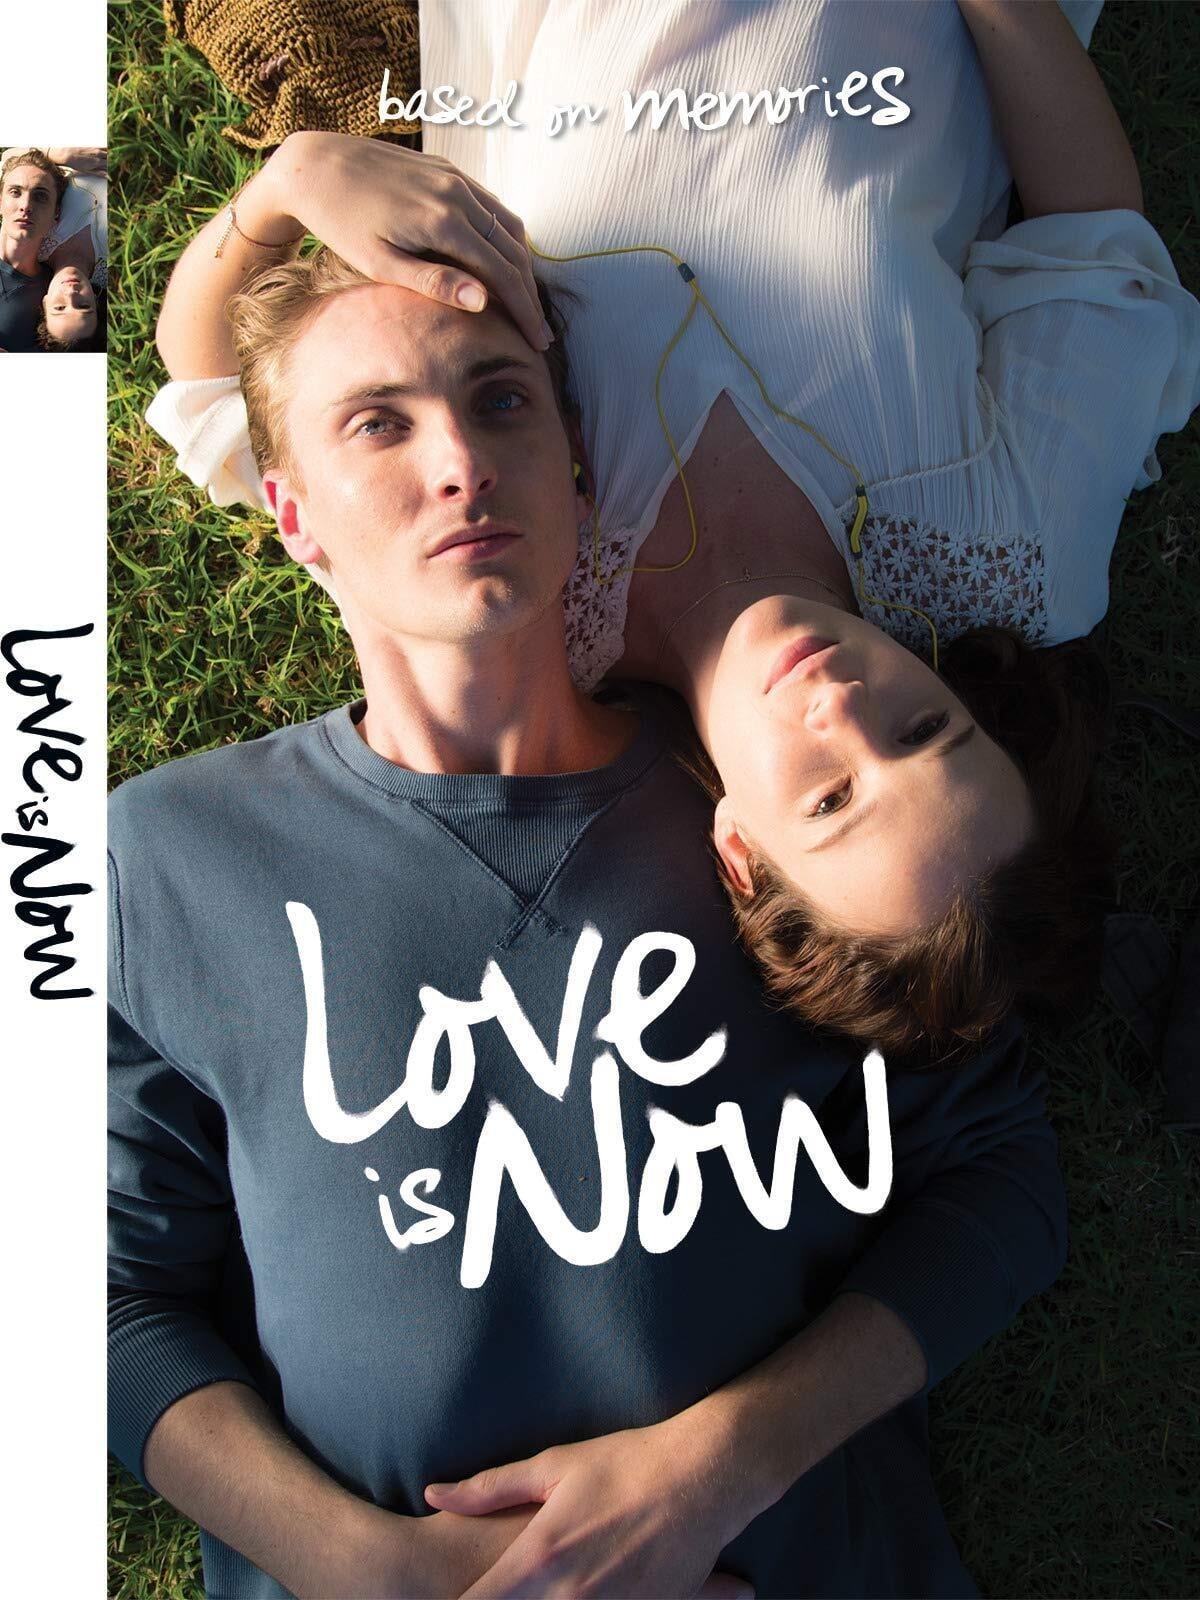 Love Is Now poster